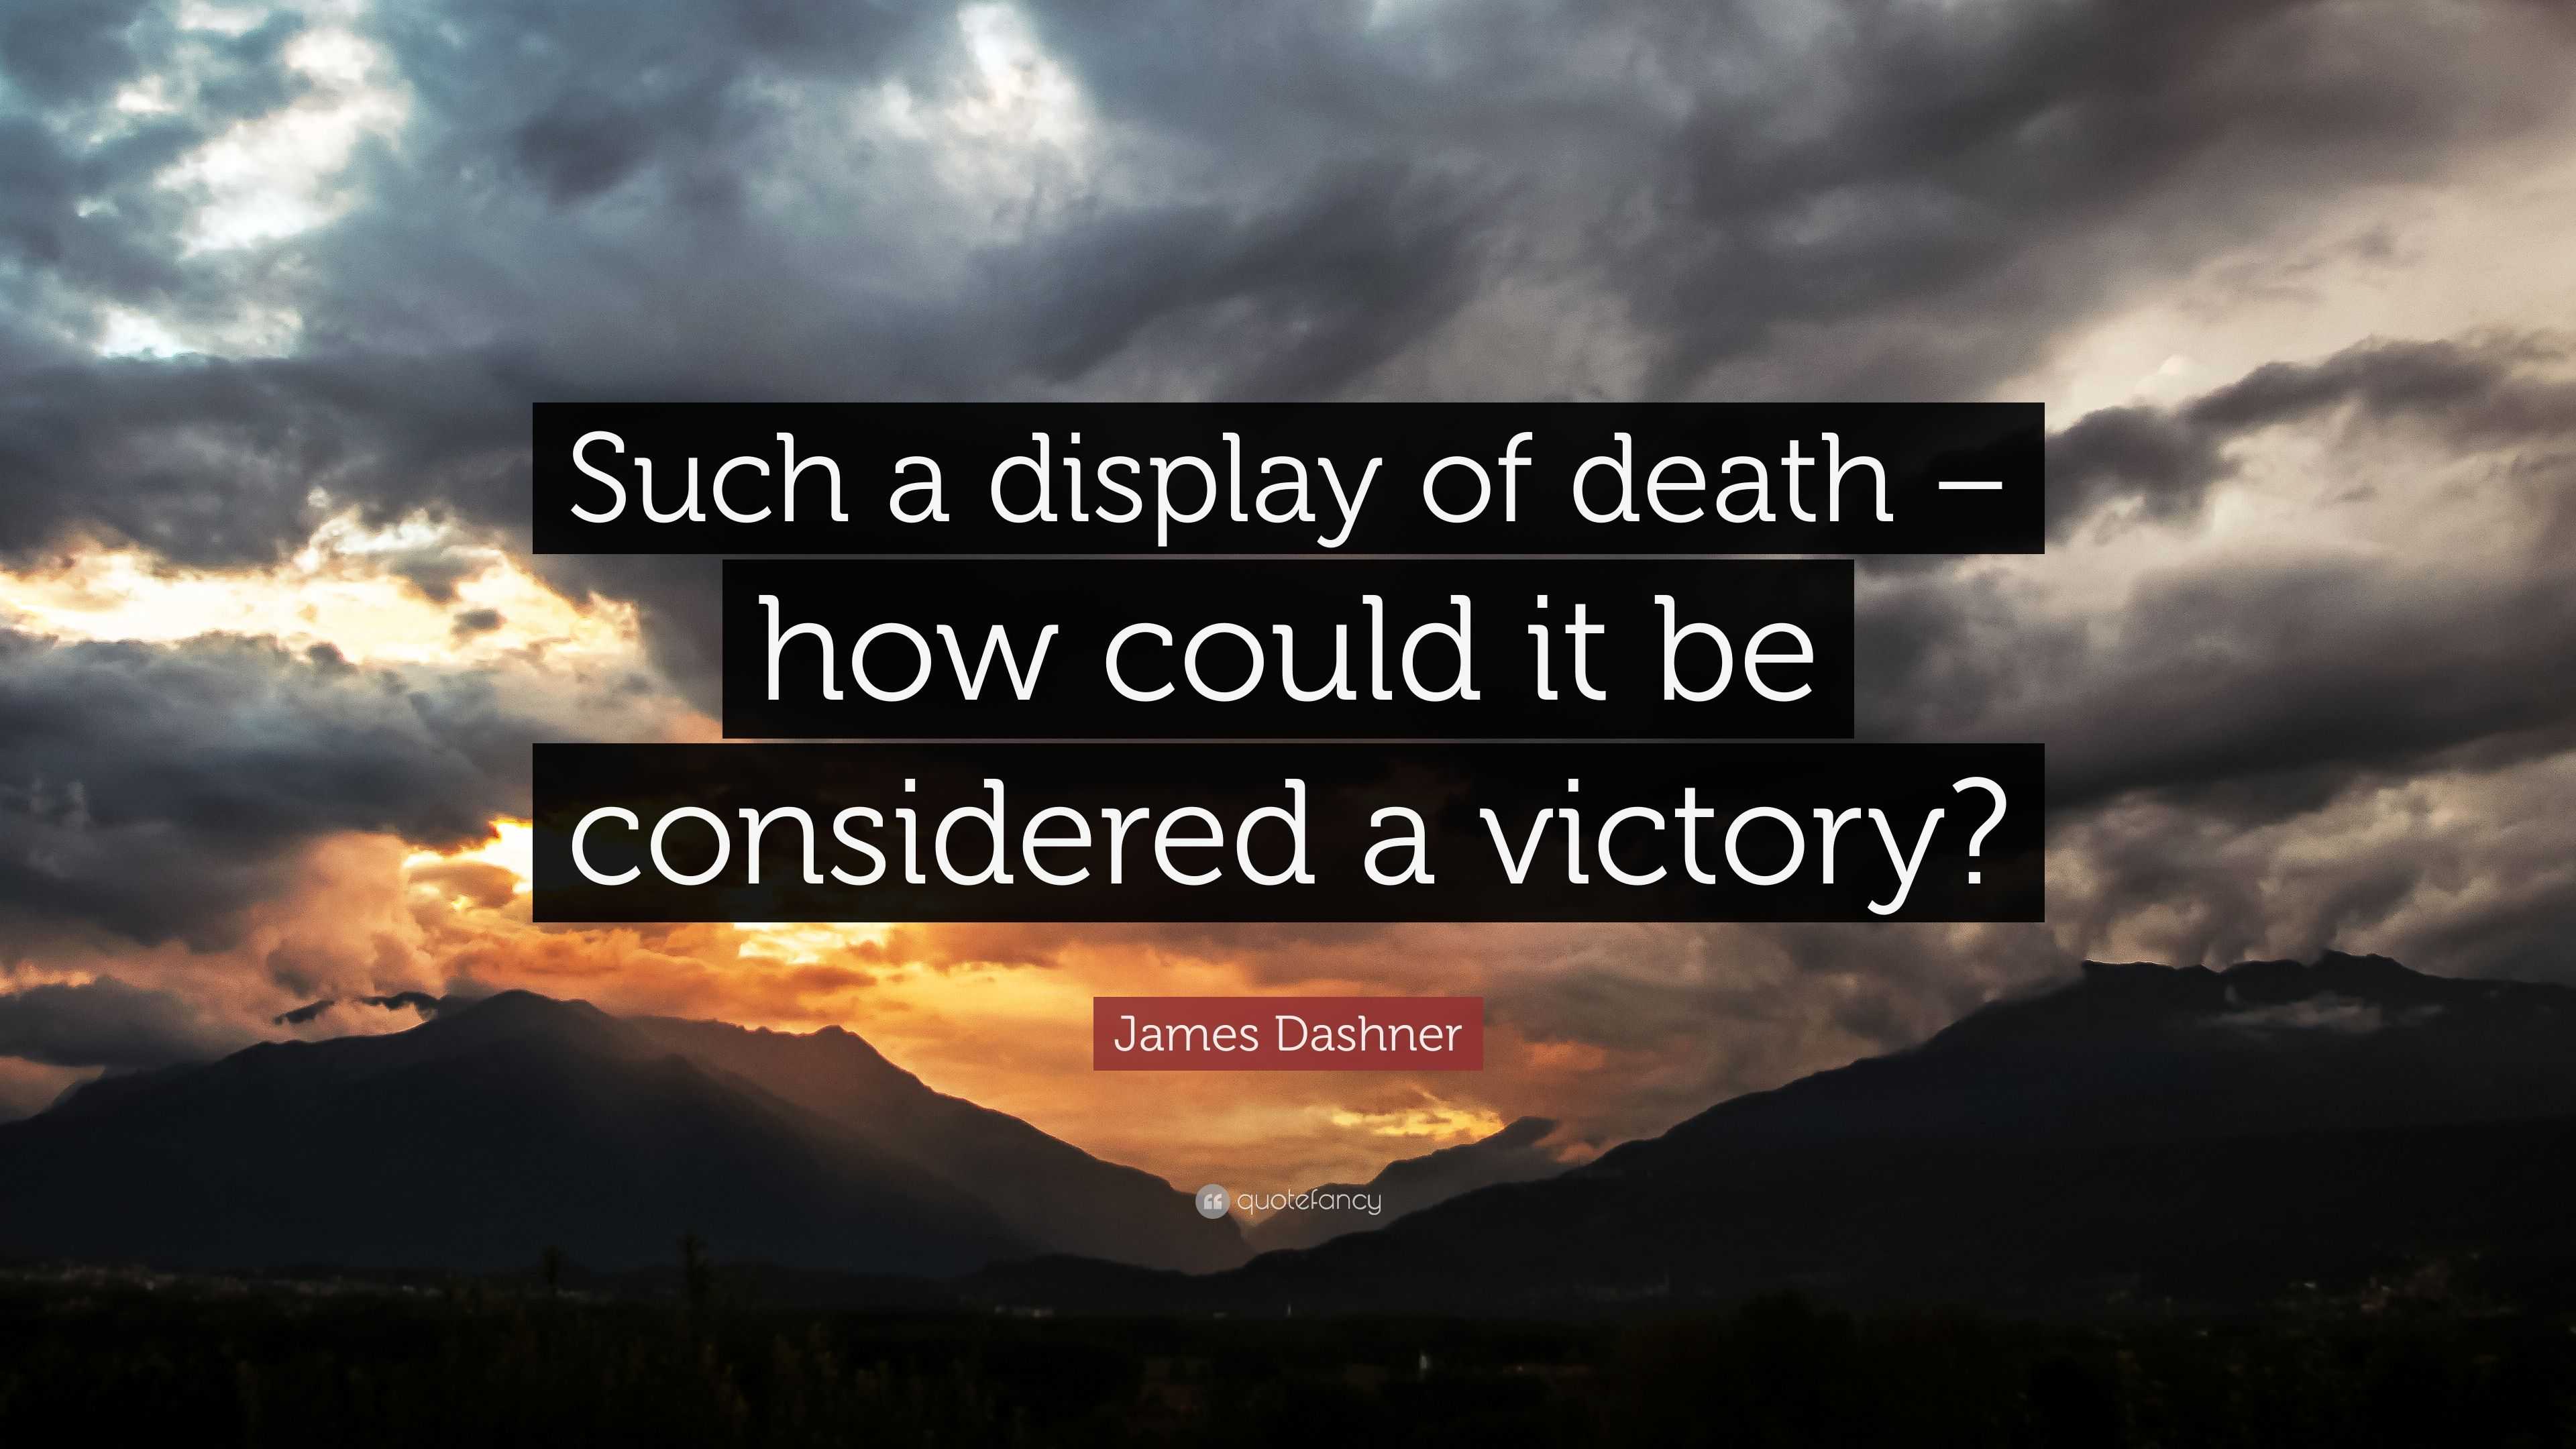 James Dashner Quote: “Such a display of death – how could it be ...